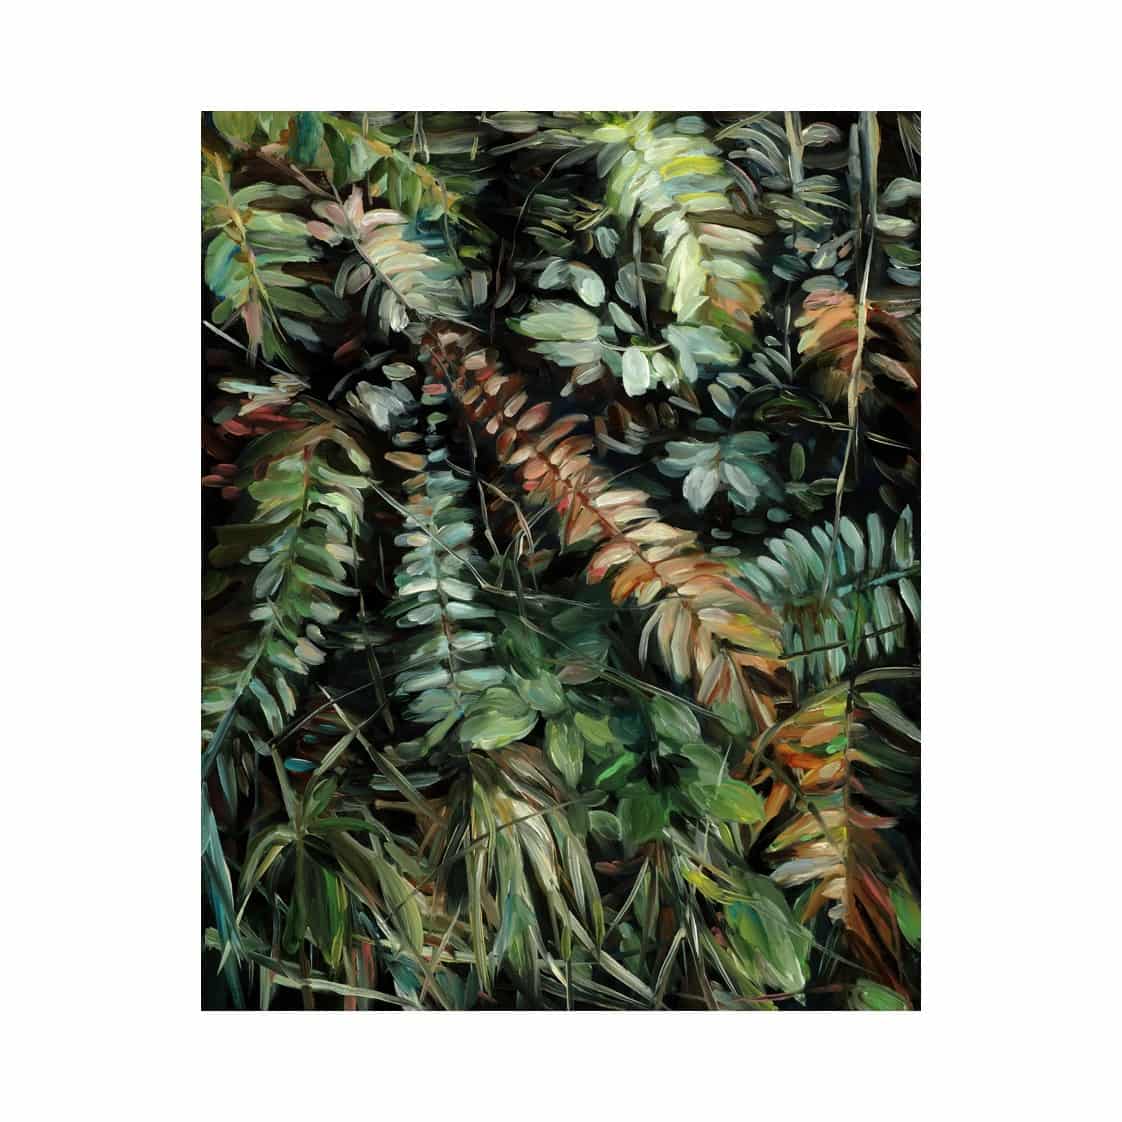 <p><span class="ql-font-roboto ql-size-small">Marisa Mary Myrah</span></p><p><span class="ql-font-roboto ql-size-small"> Grass and Ferns - $650 - 16"X20"</span></p> logo